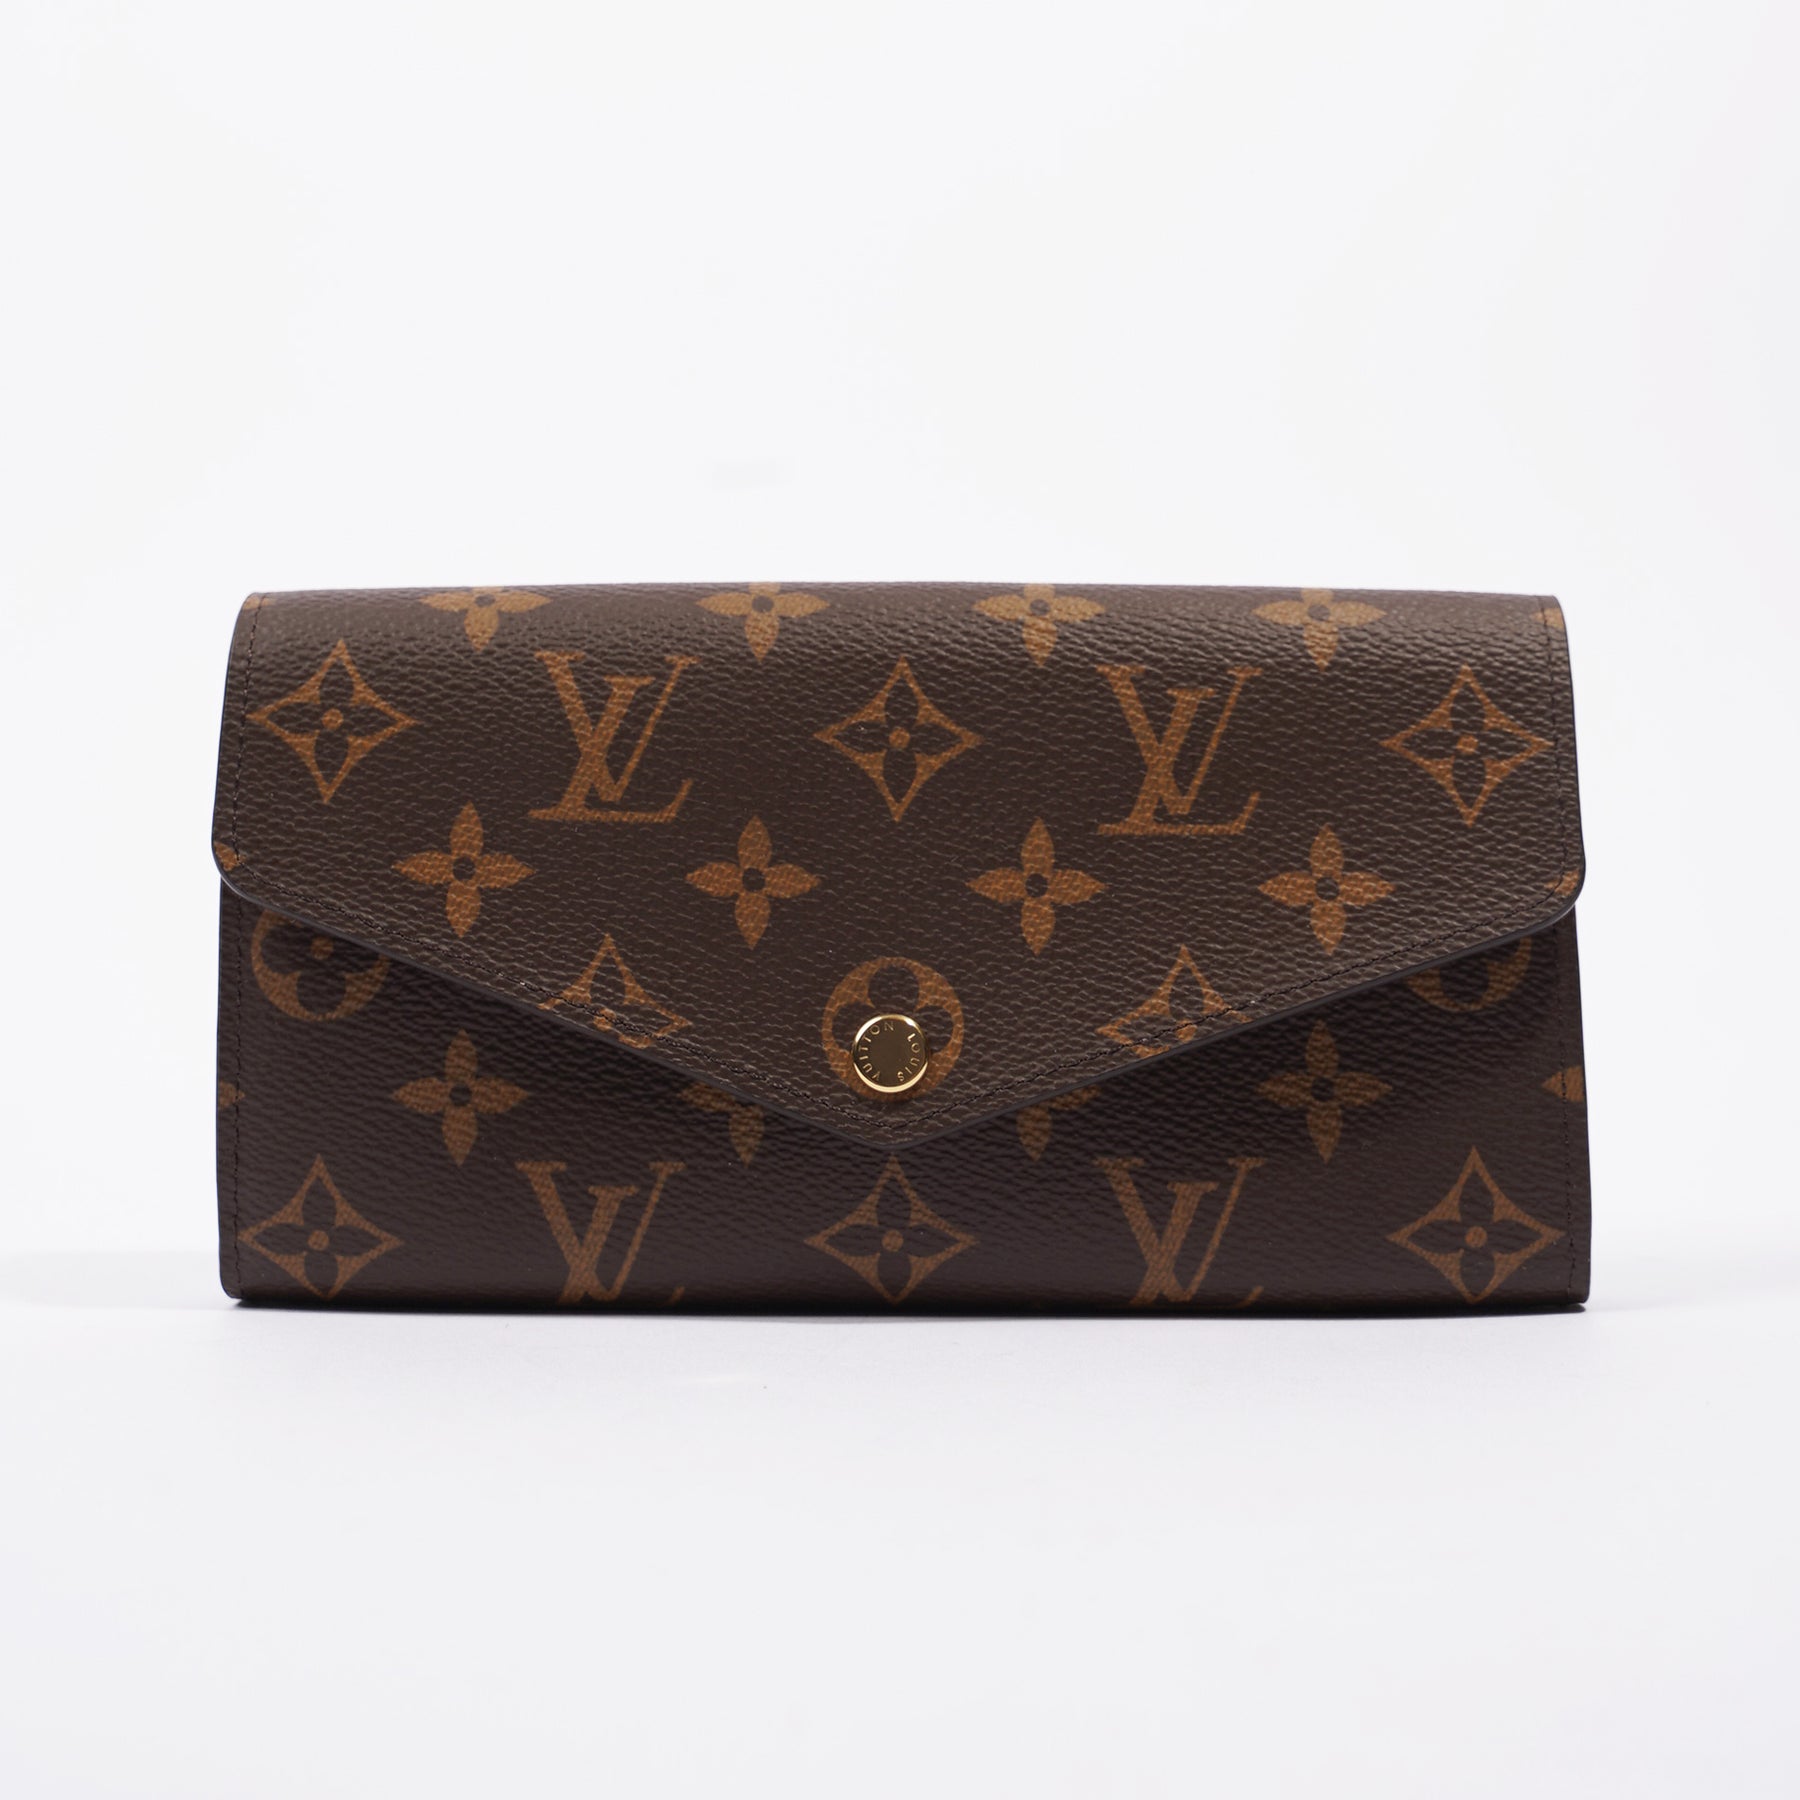 Authentic Louis Vuitton Sarah Wallet With Chain Shoulder Strap in